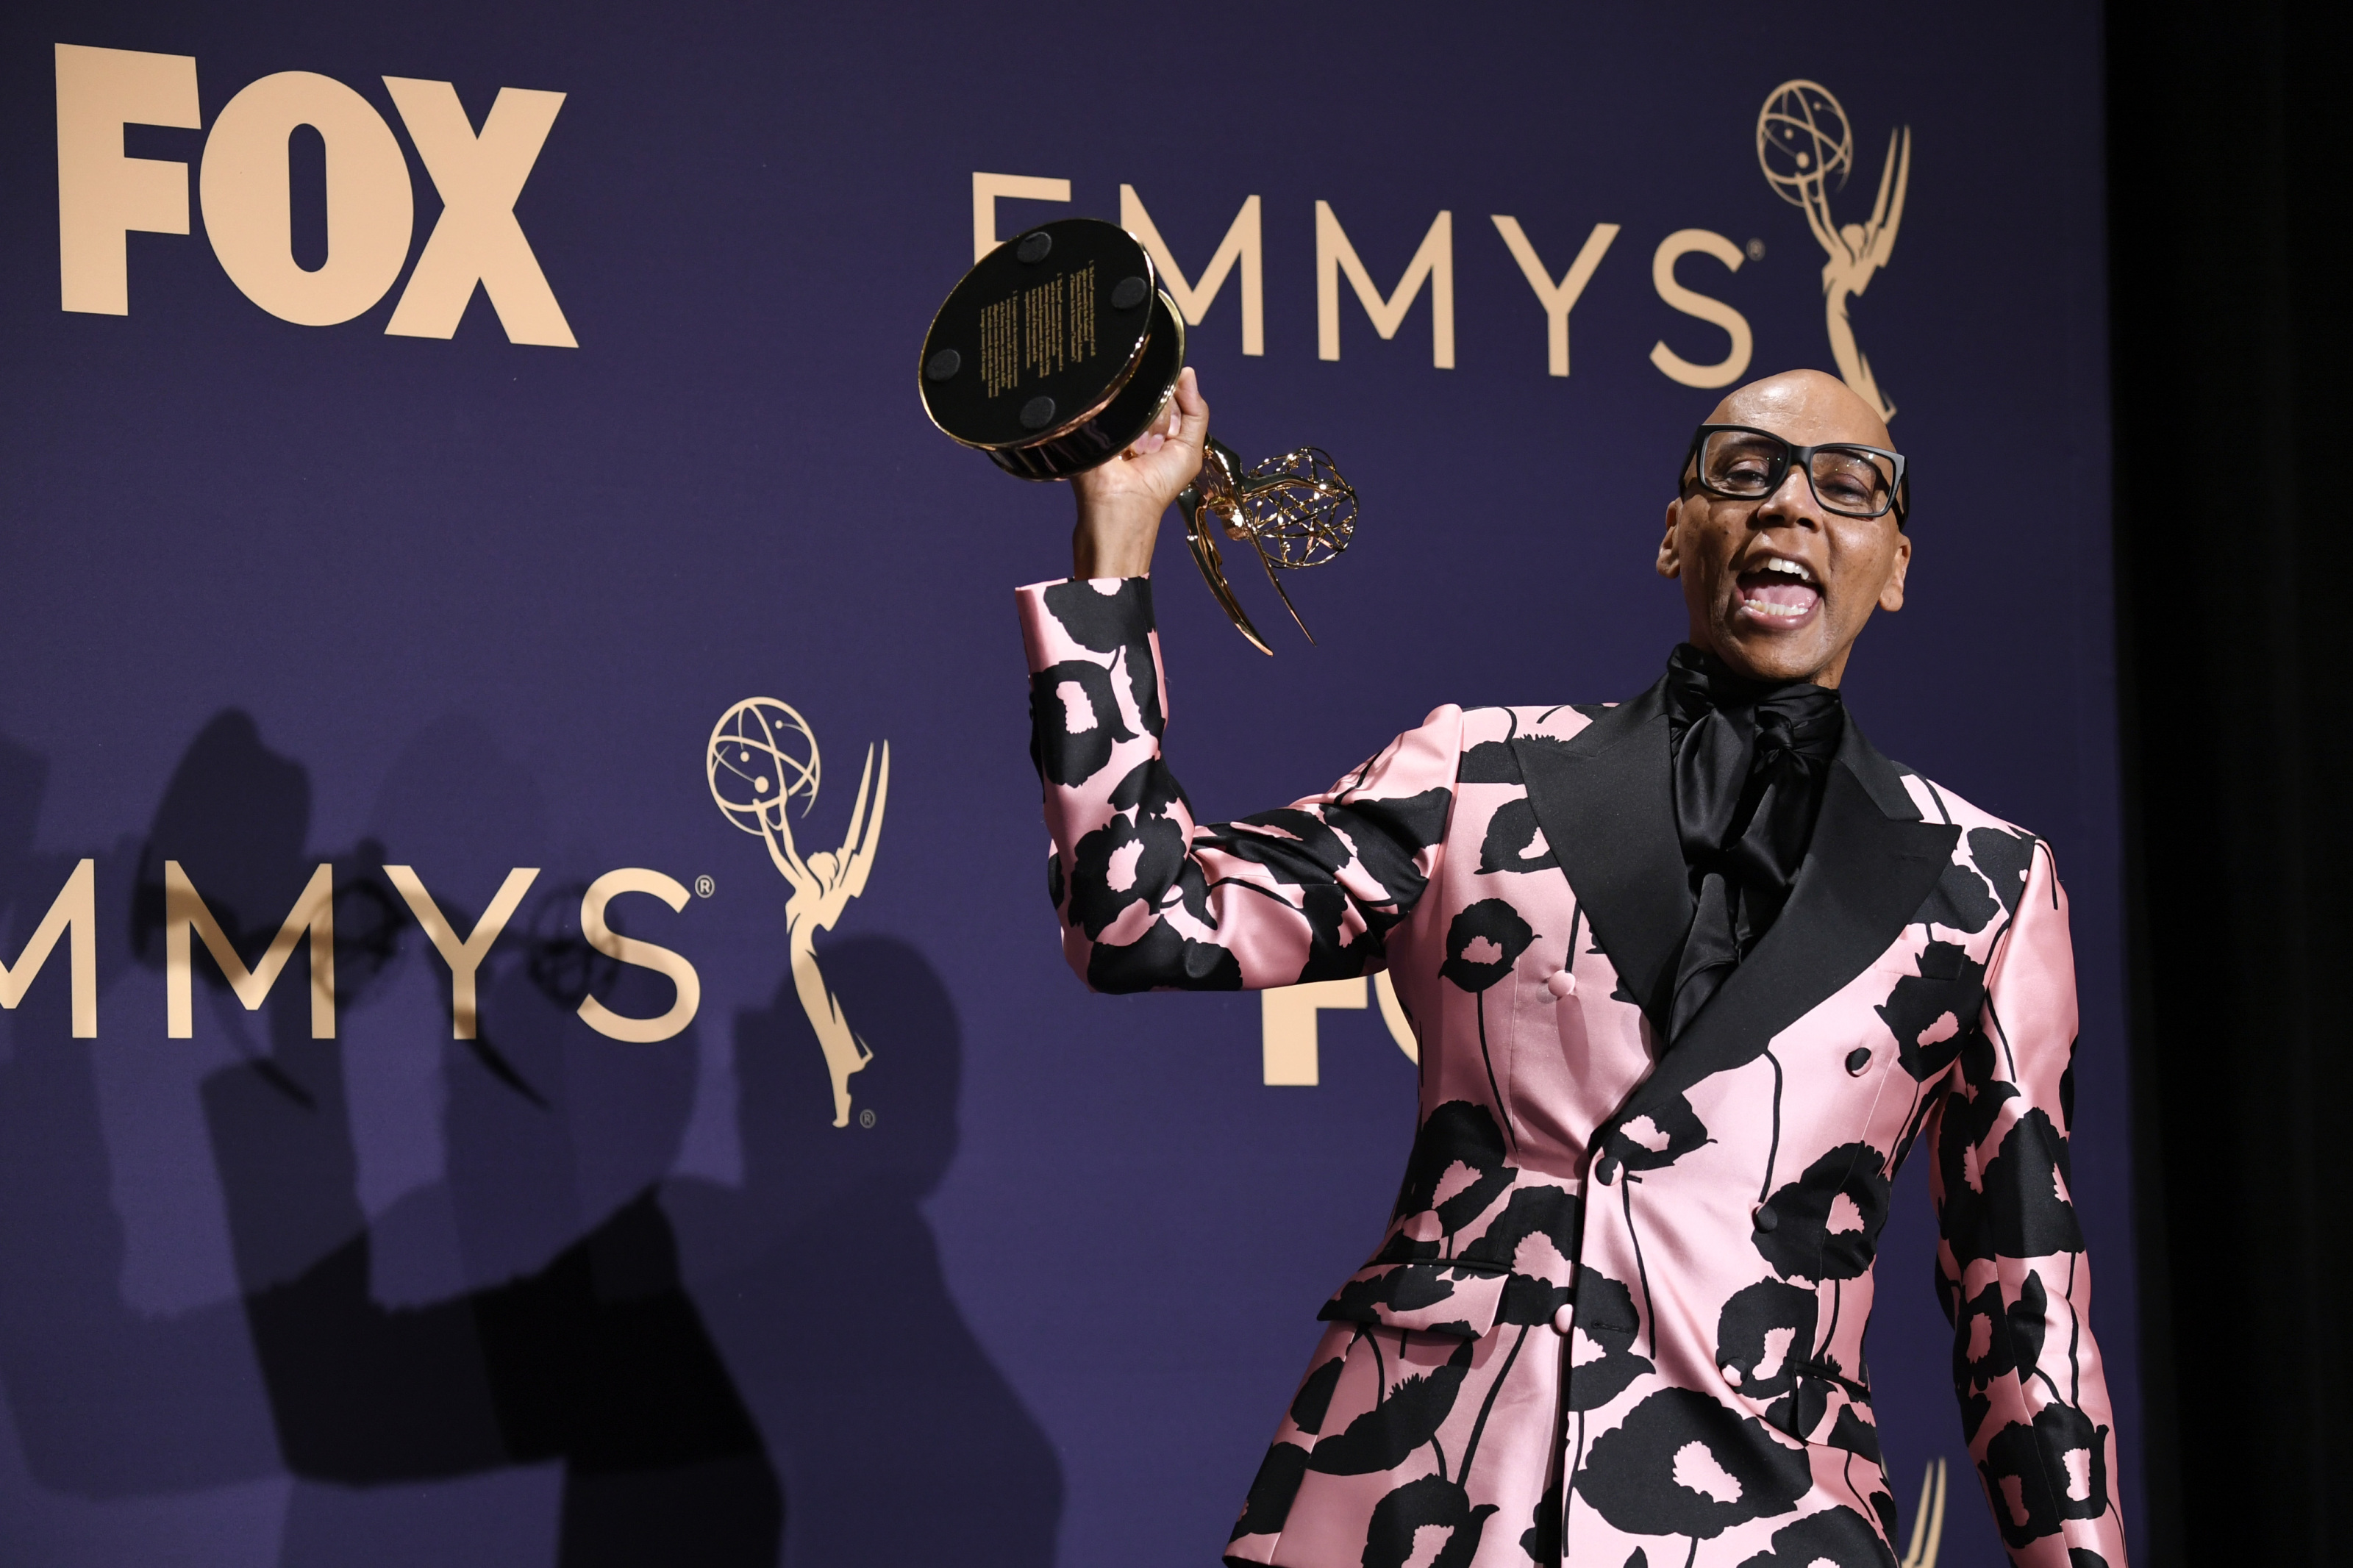 Game of Thrones' cast says goodbye on 2019 Emmy Awards purple